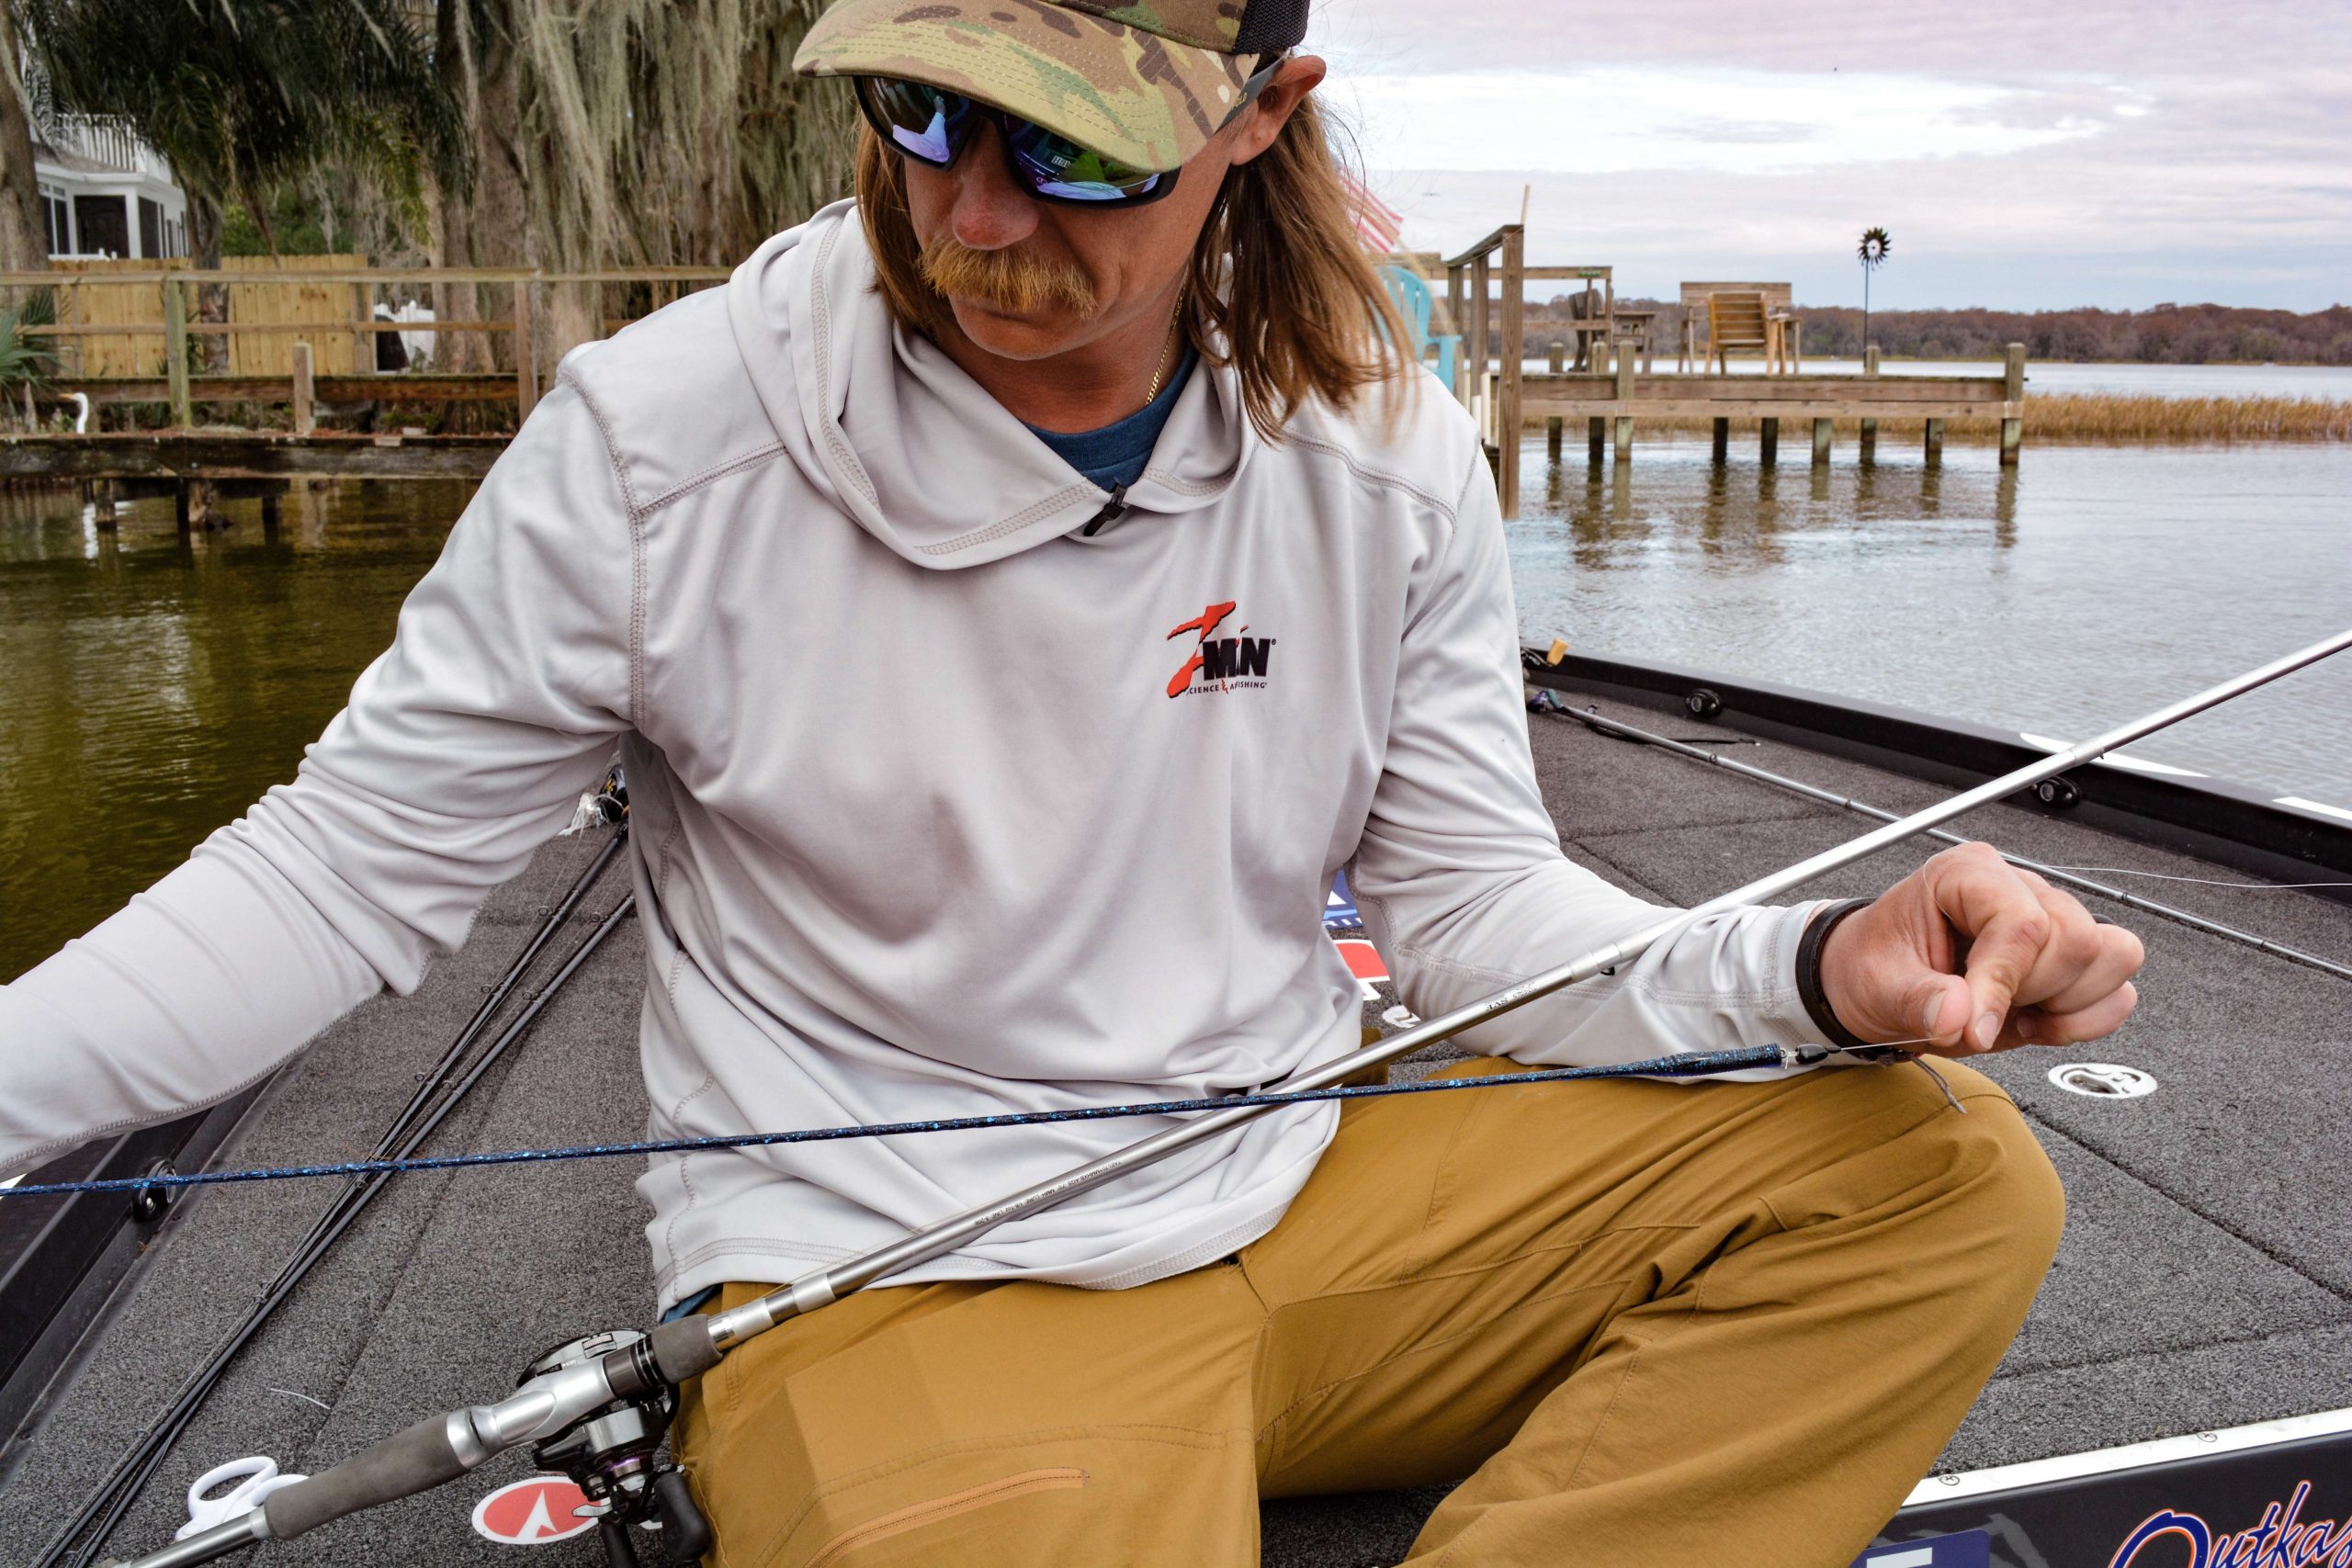 Each ElaZtech bait offers incredible combinations of softness and action with ample stretch and durability to last for hours, days and dozens and dozens of bites.